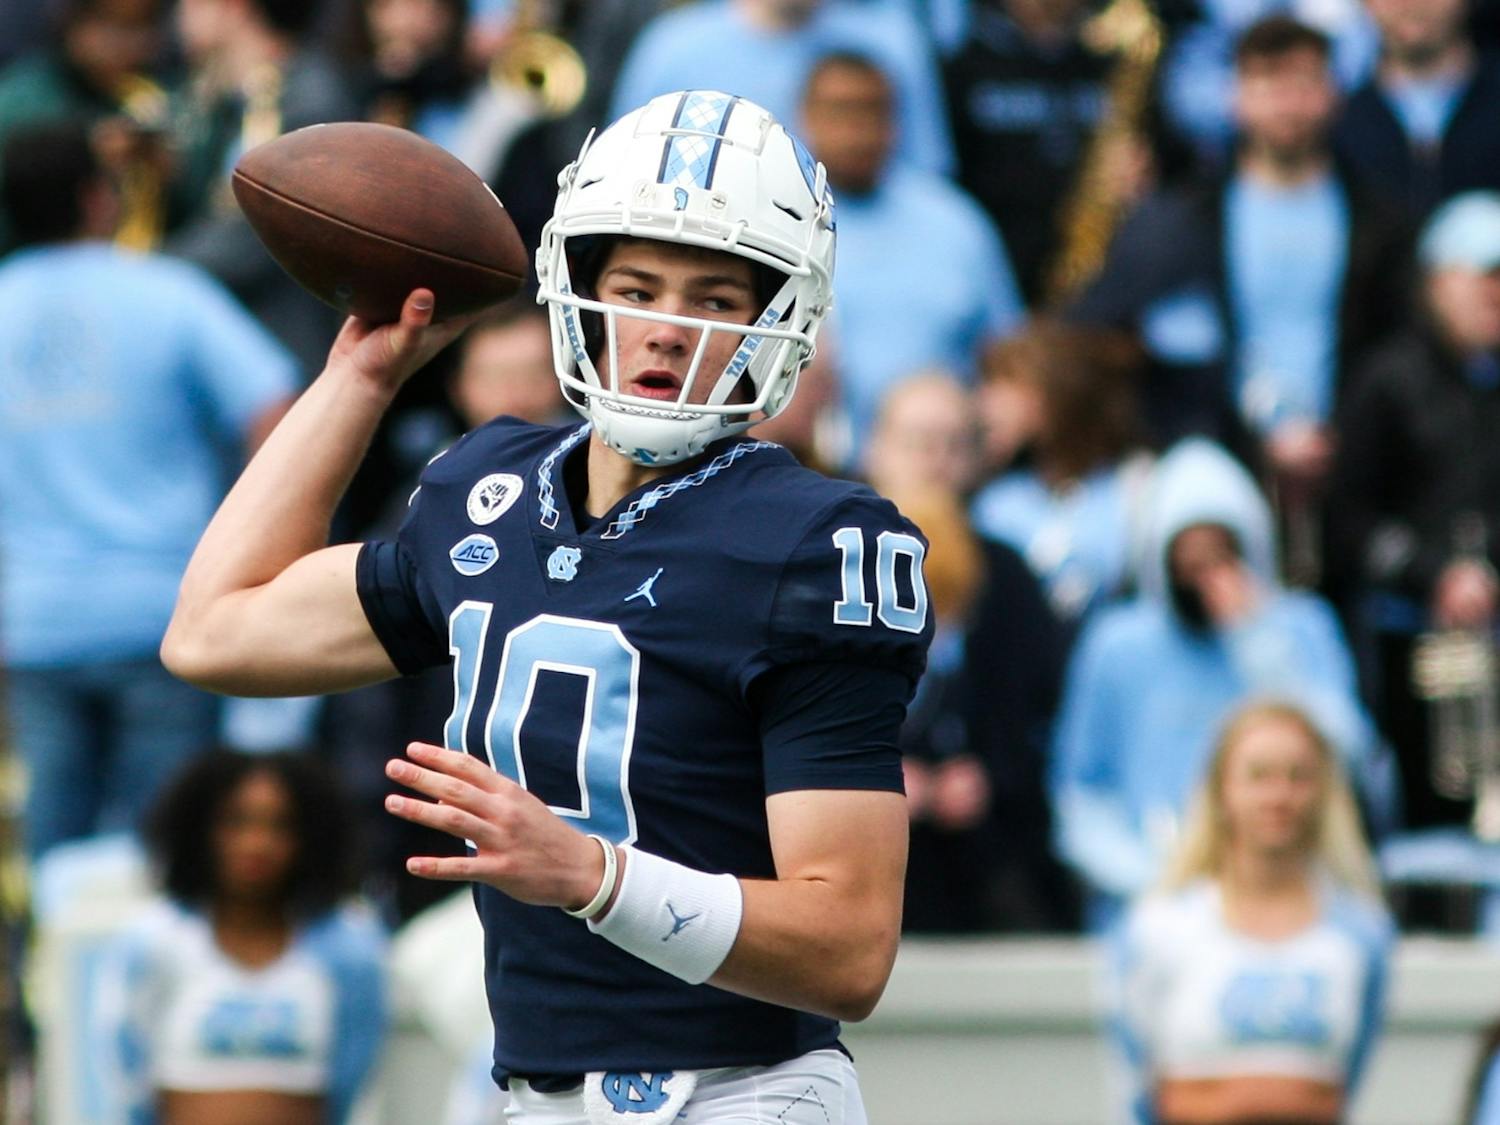 Redshirt freshman quarterback Drake Maye looks for a pass in the Spring Game on Saturday, April 9, 2022. The Tar Heels and Carolina tied, 14-14.